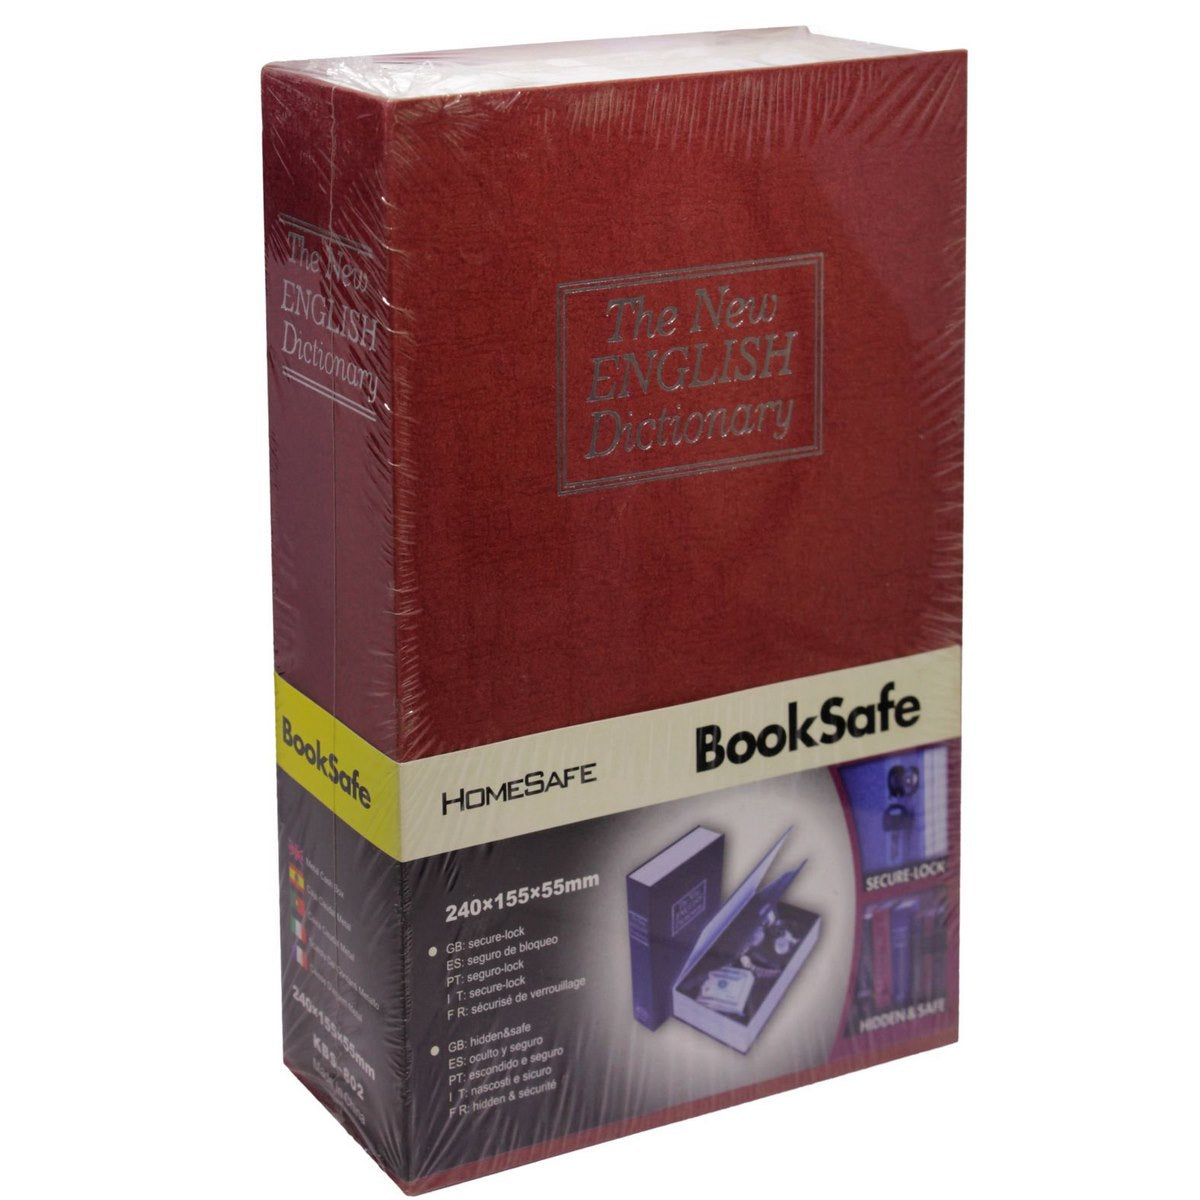 Book Safe Locker - Size: 240x155x55mm - For Hiding Cash, Credit Cards, Important Documents, Jewelry - Use as Return Gift, Corporate Gifting, Home Use - JA-KBS802